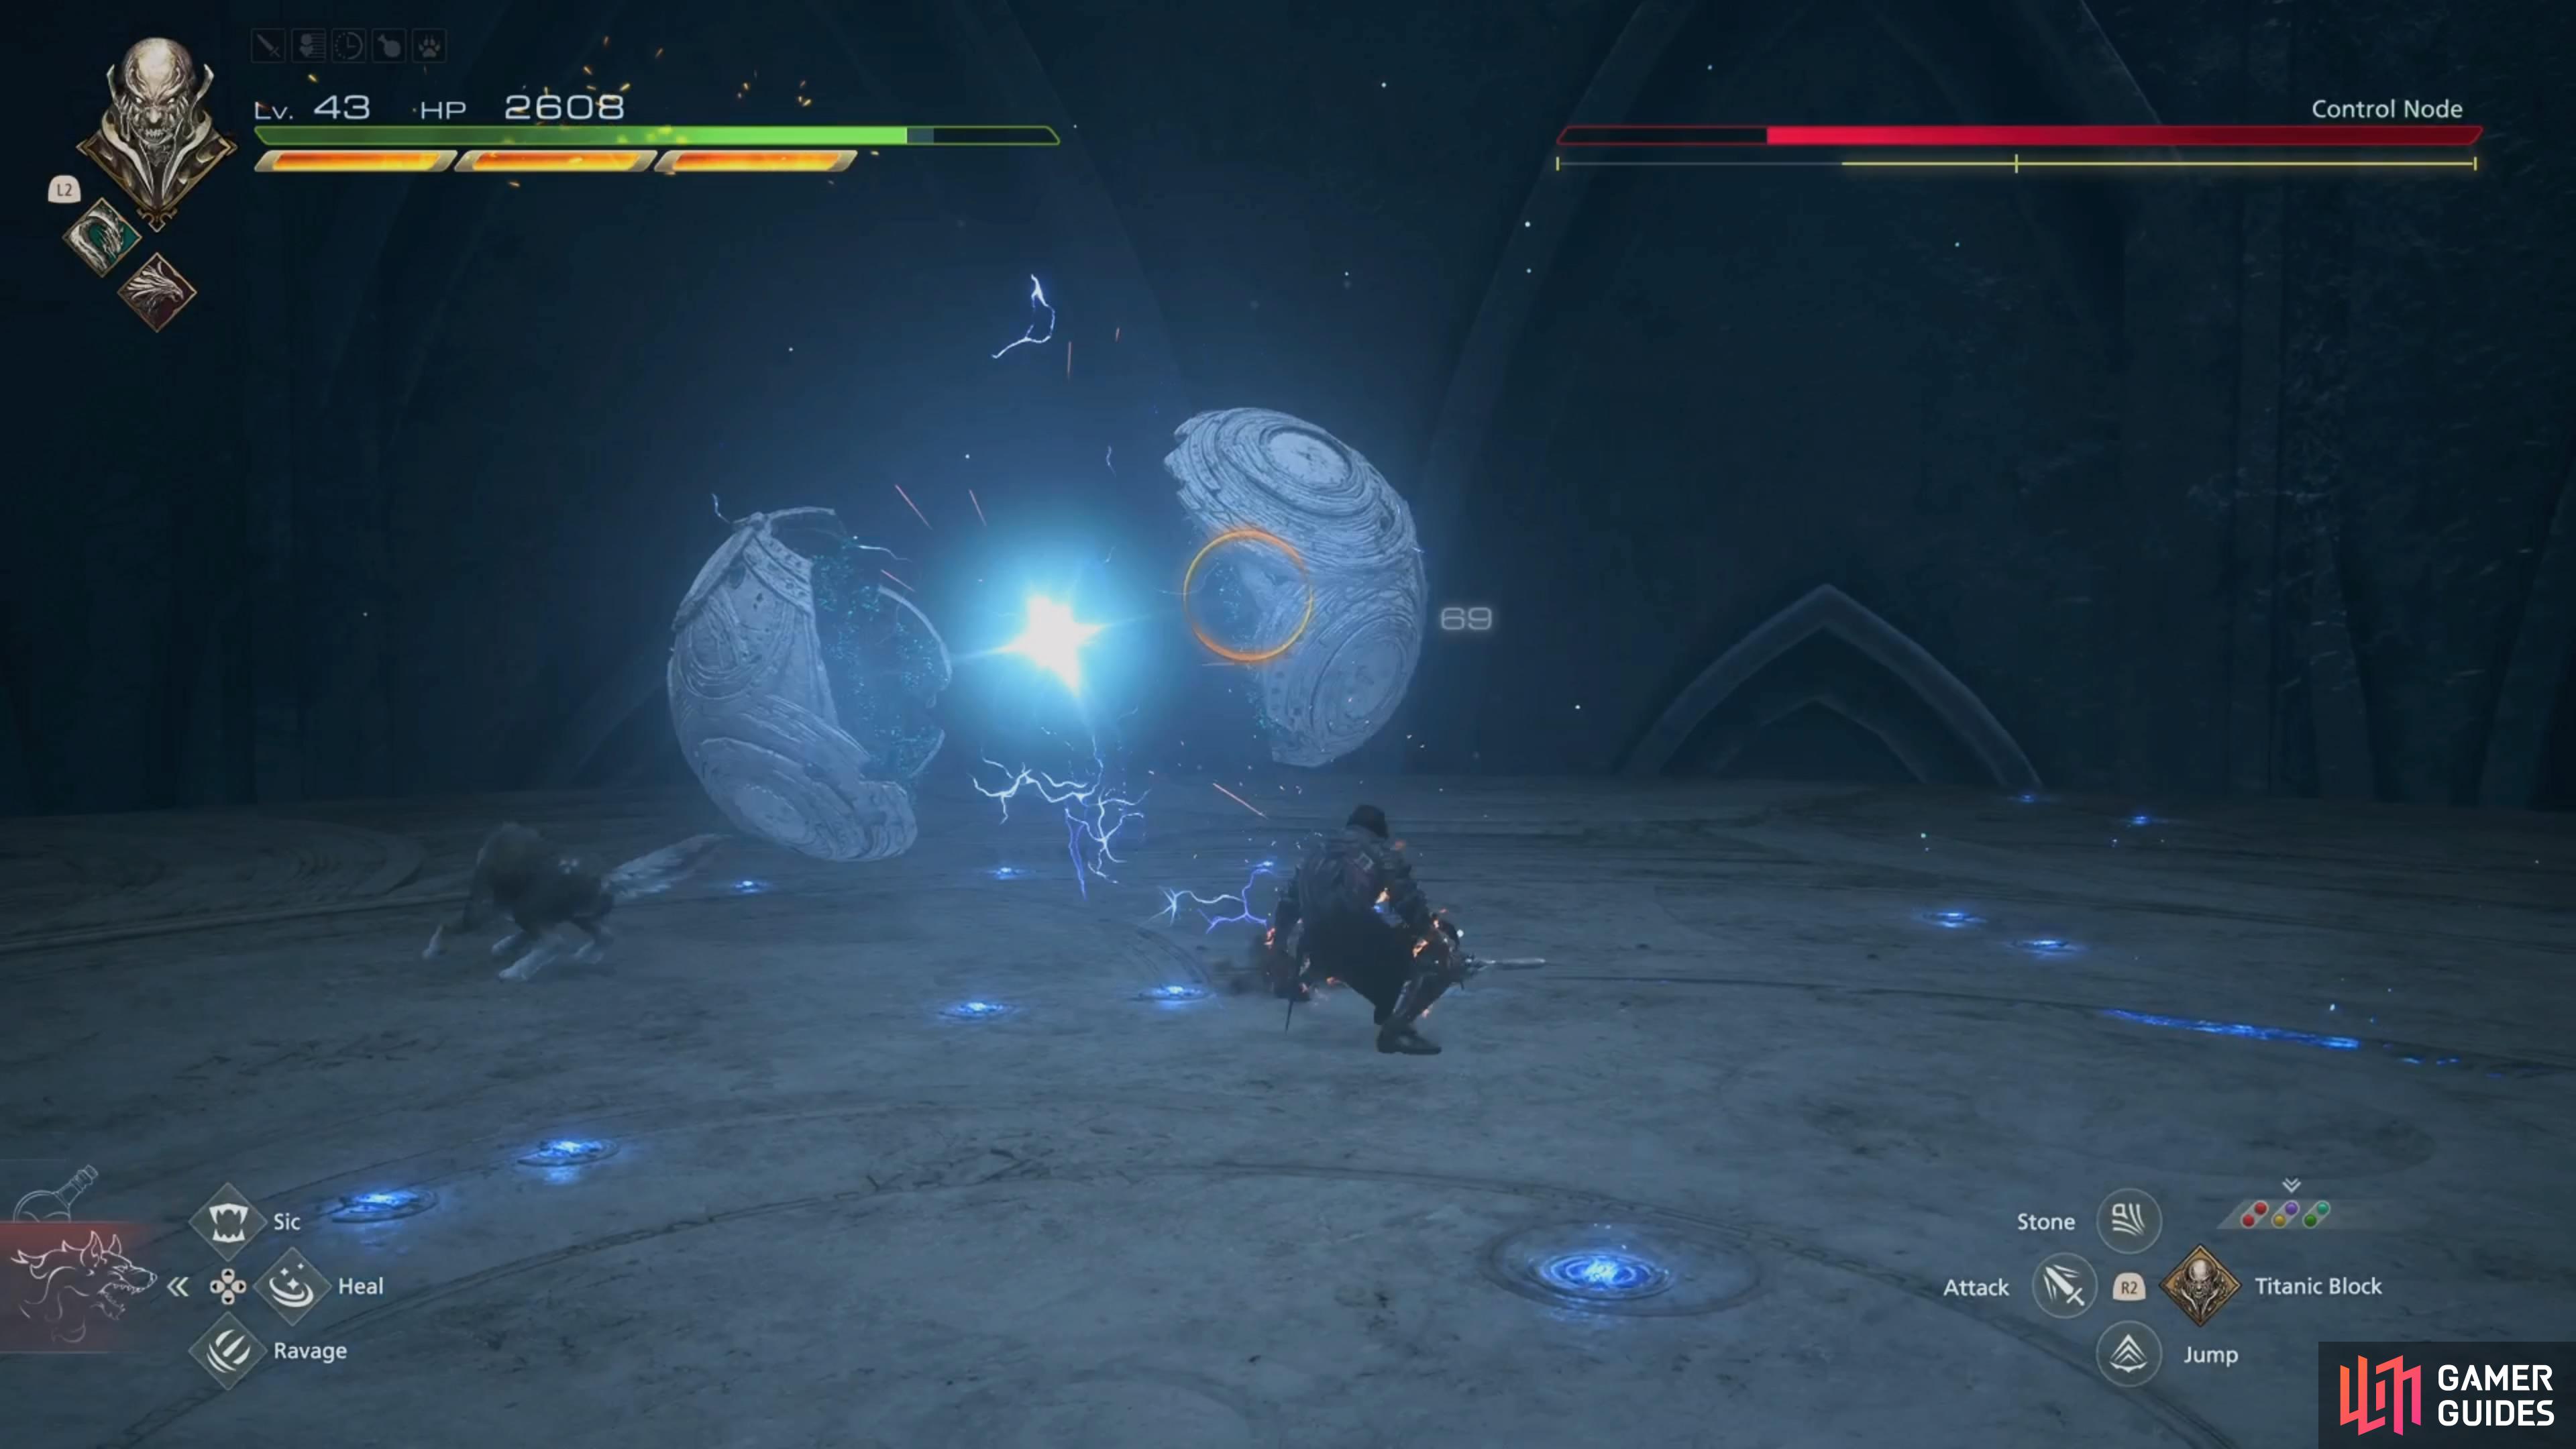 The boss will separate to try and attack you with its one melee strike.